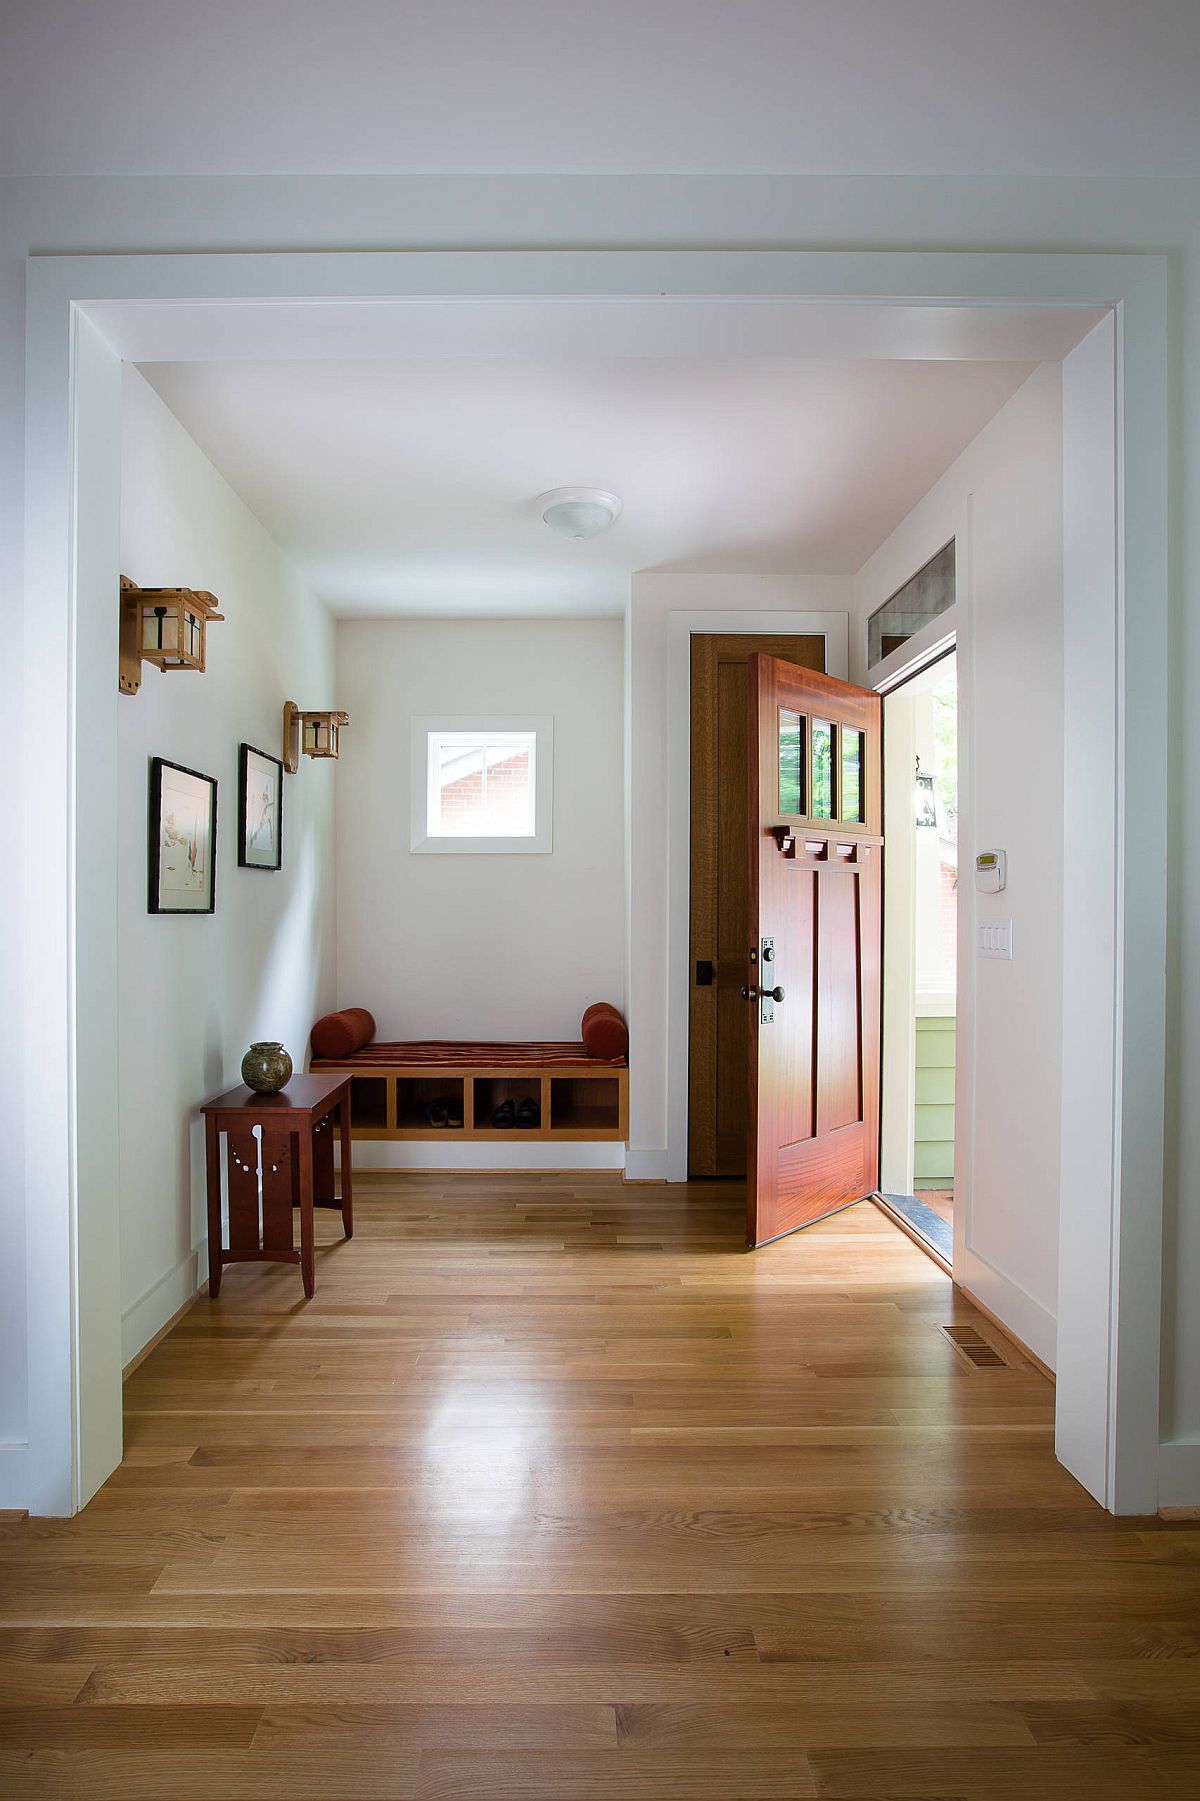 Unassuming entry room in white with functional wooden decor that offers storage space